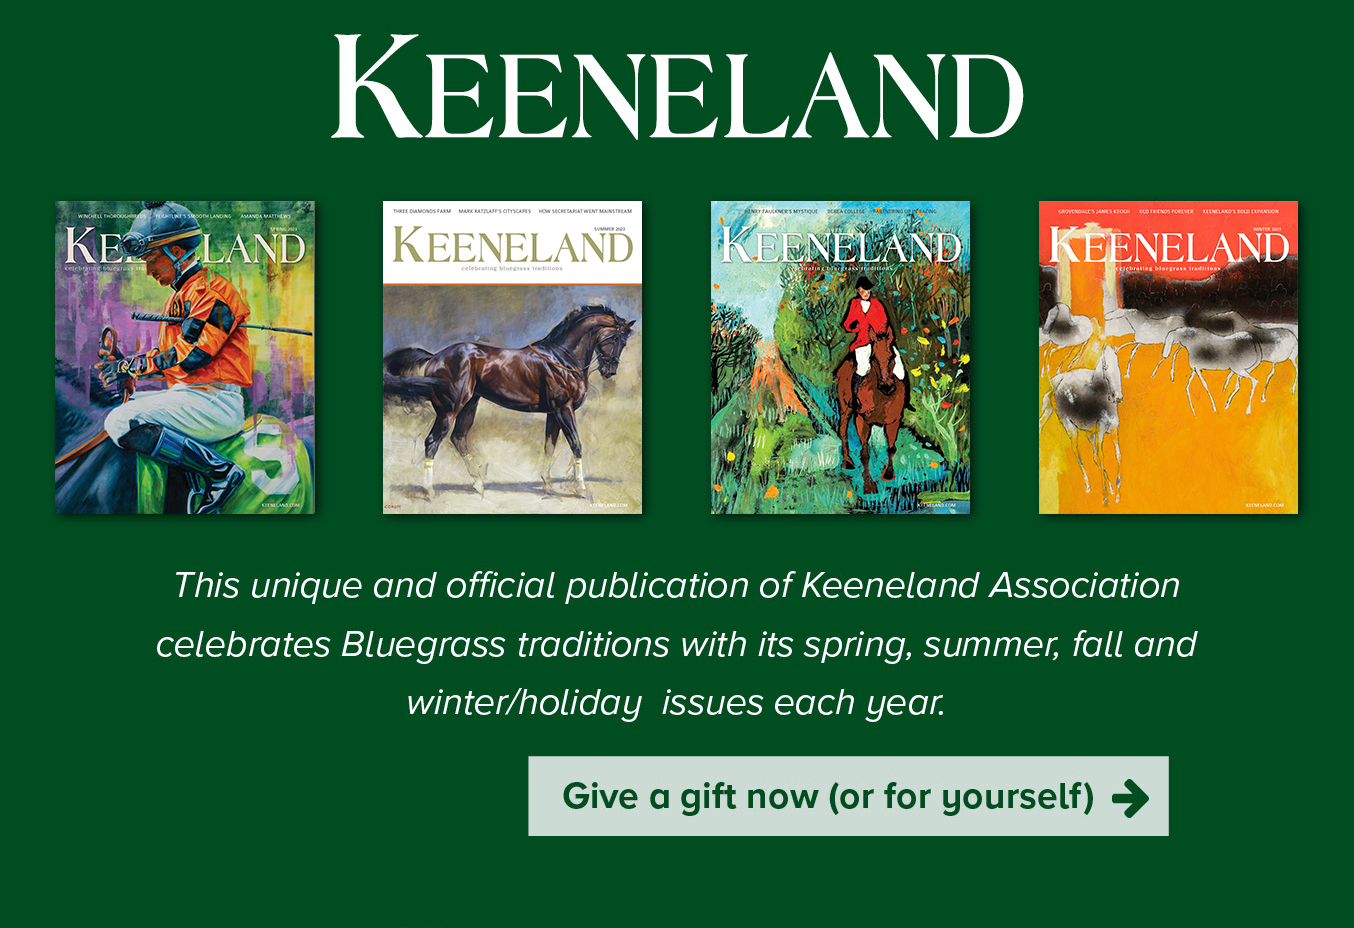 KEENELAND MAGAZINE- This unique and official publication of Keeneland Association celebrates bluegrass traditions with its spring, summer, fall and winter/holiday  issues each year.